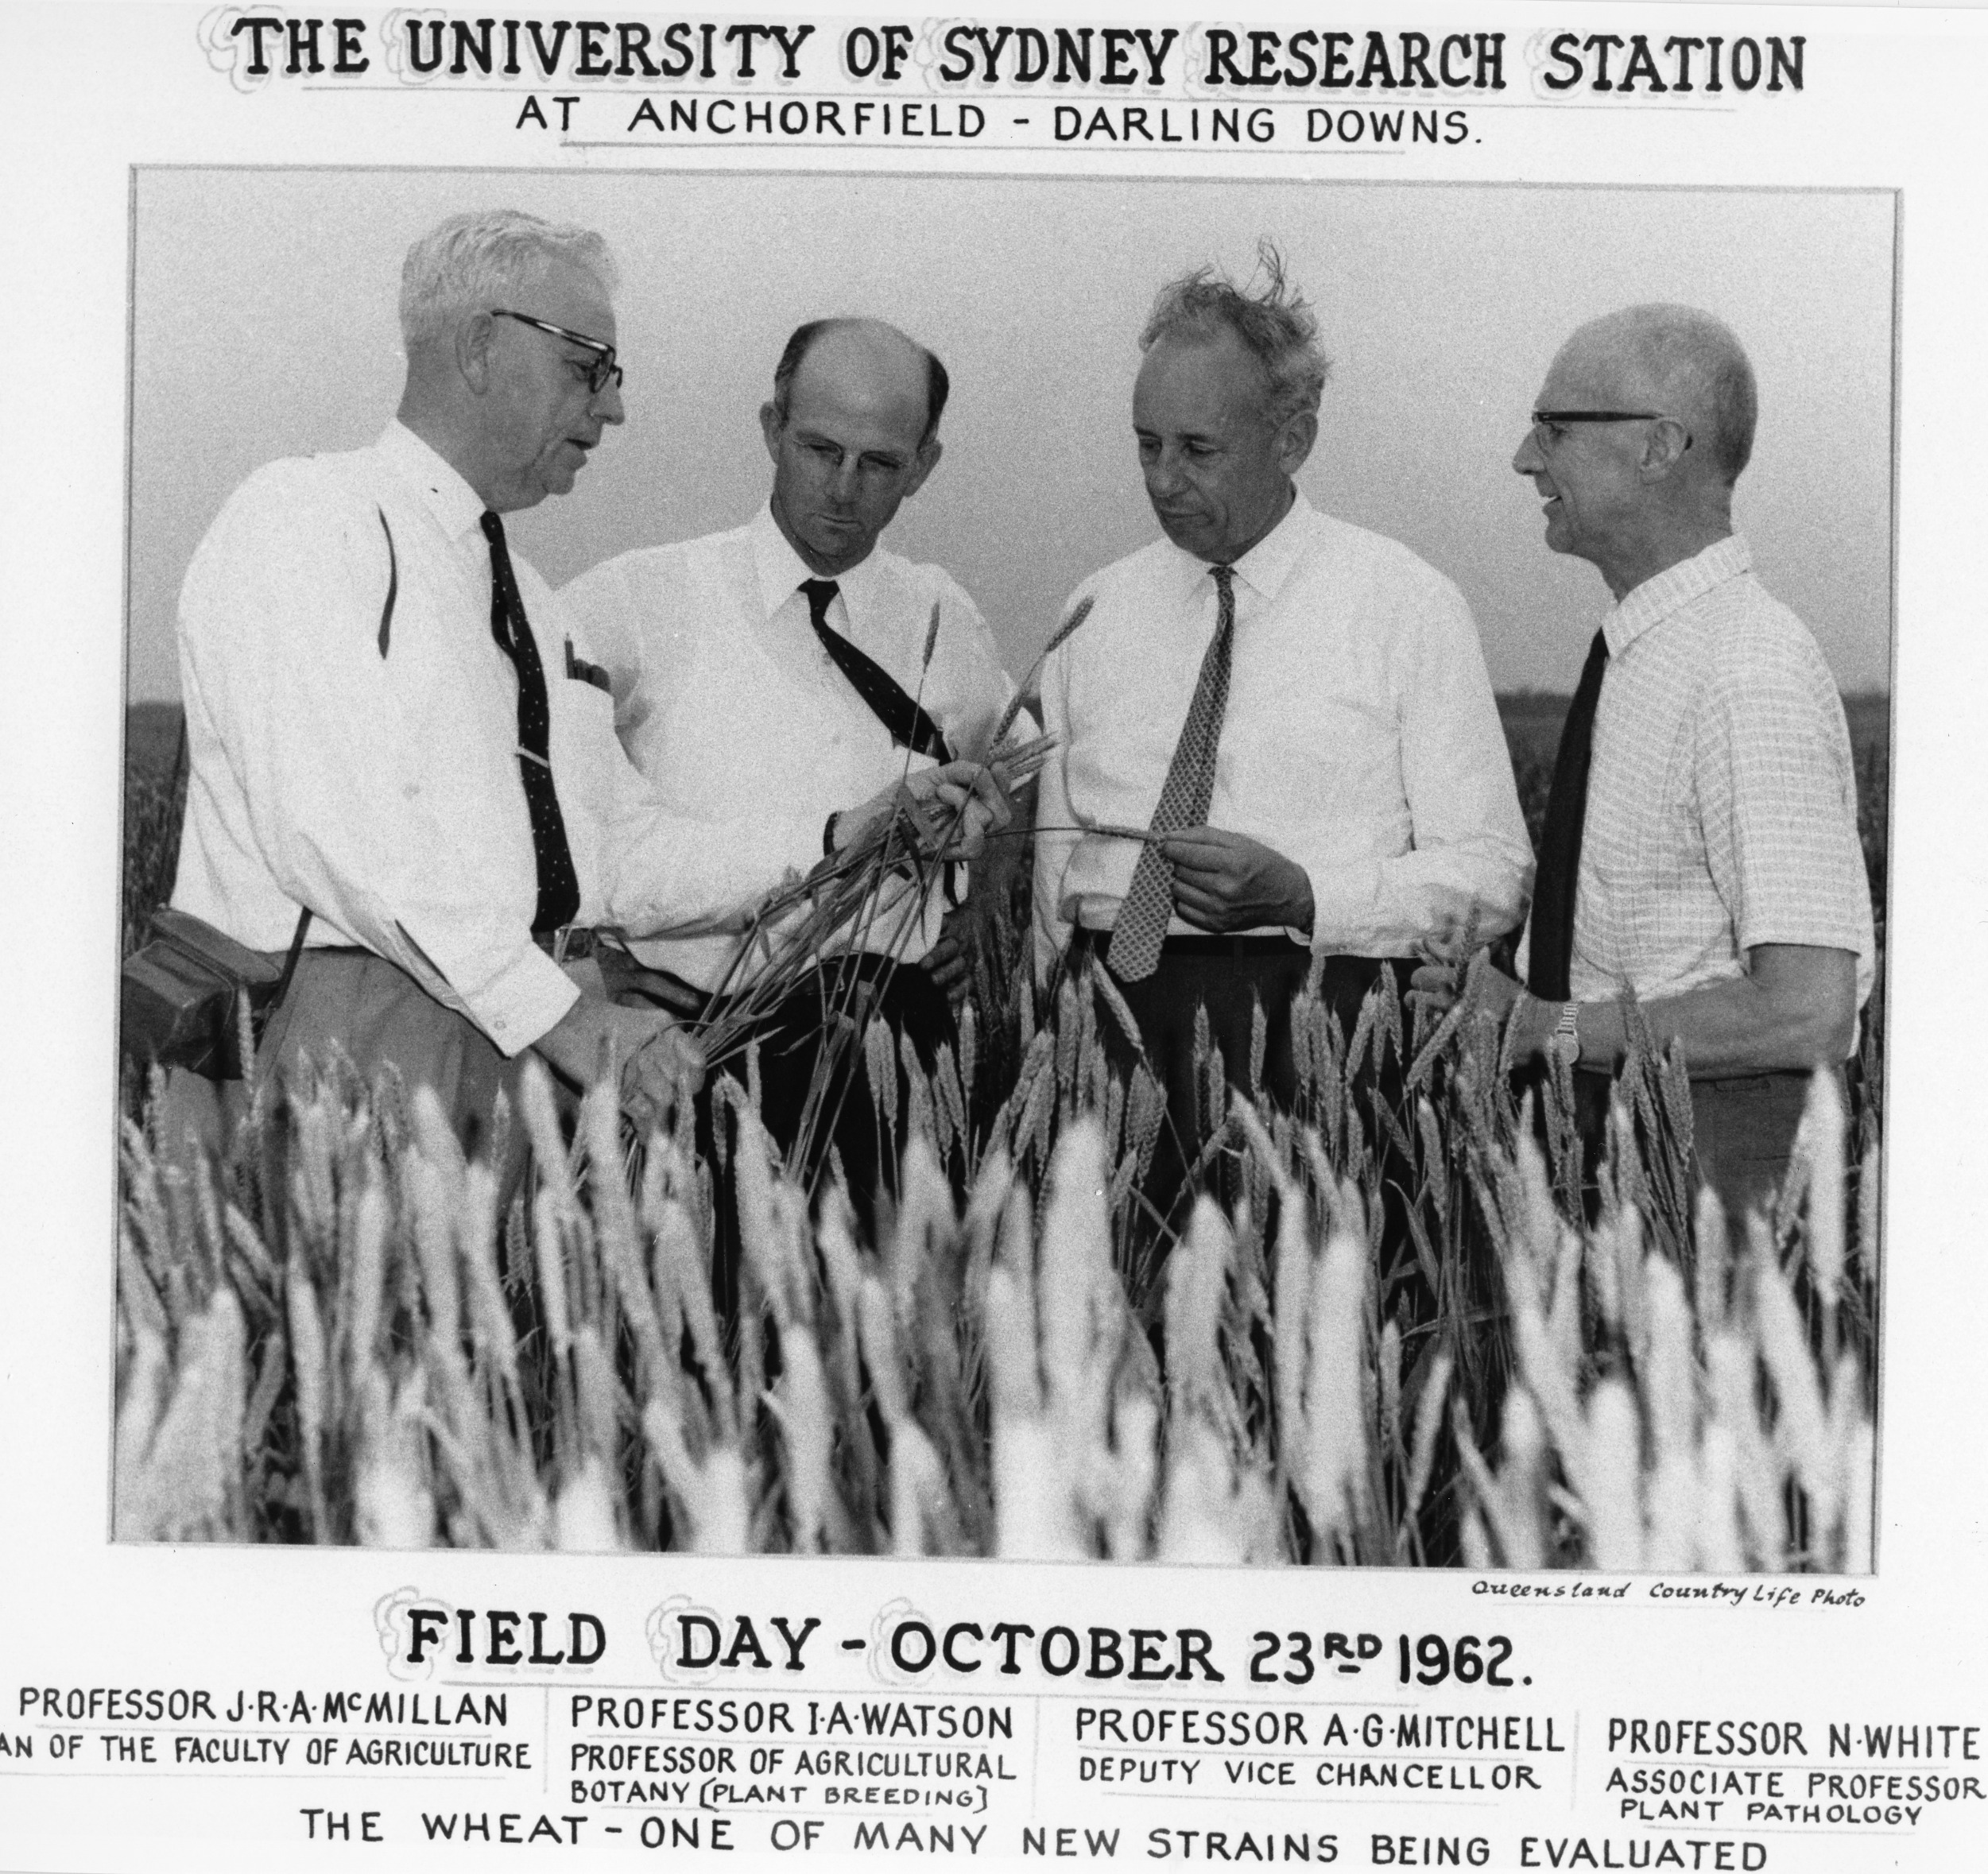 FIELD DAY AT RESEARCH STATION AT ANCHORFIELD, DARLING DOWNS, QUEENSLAND